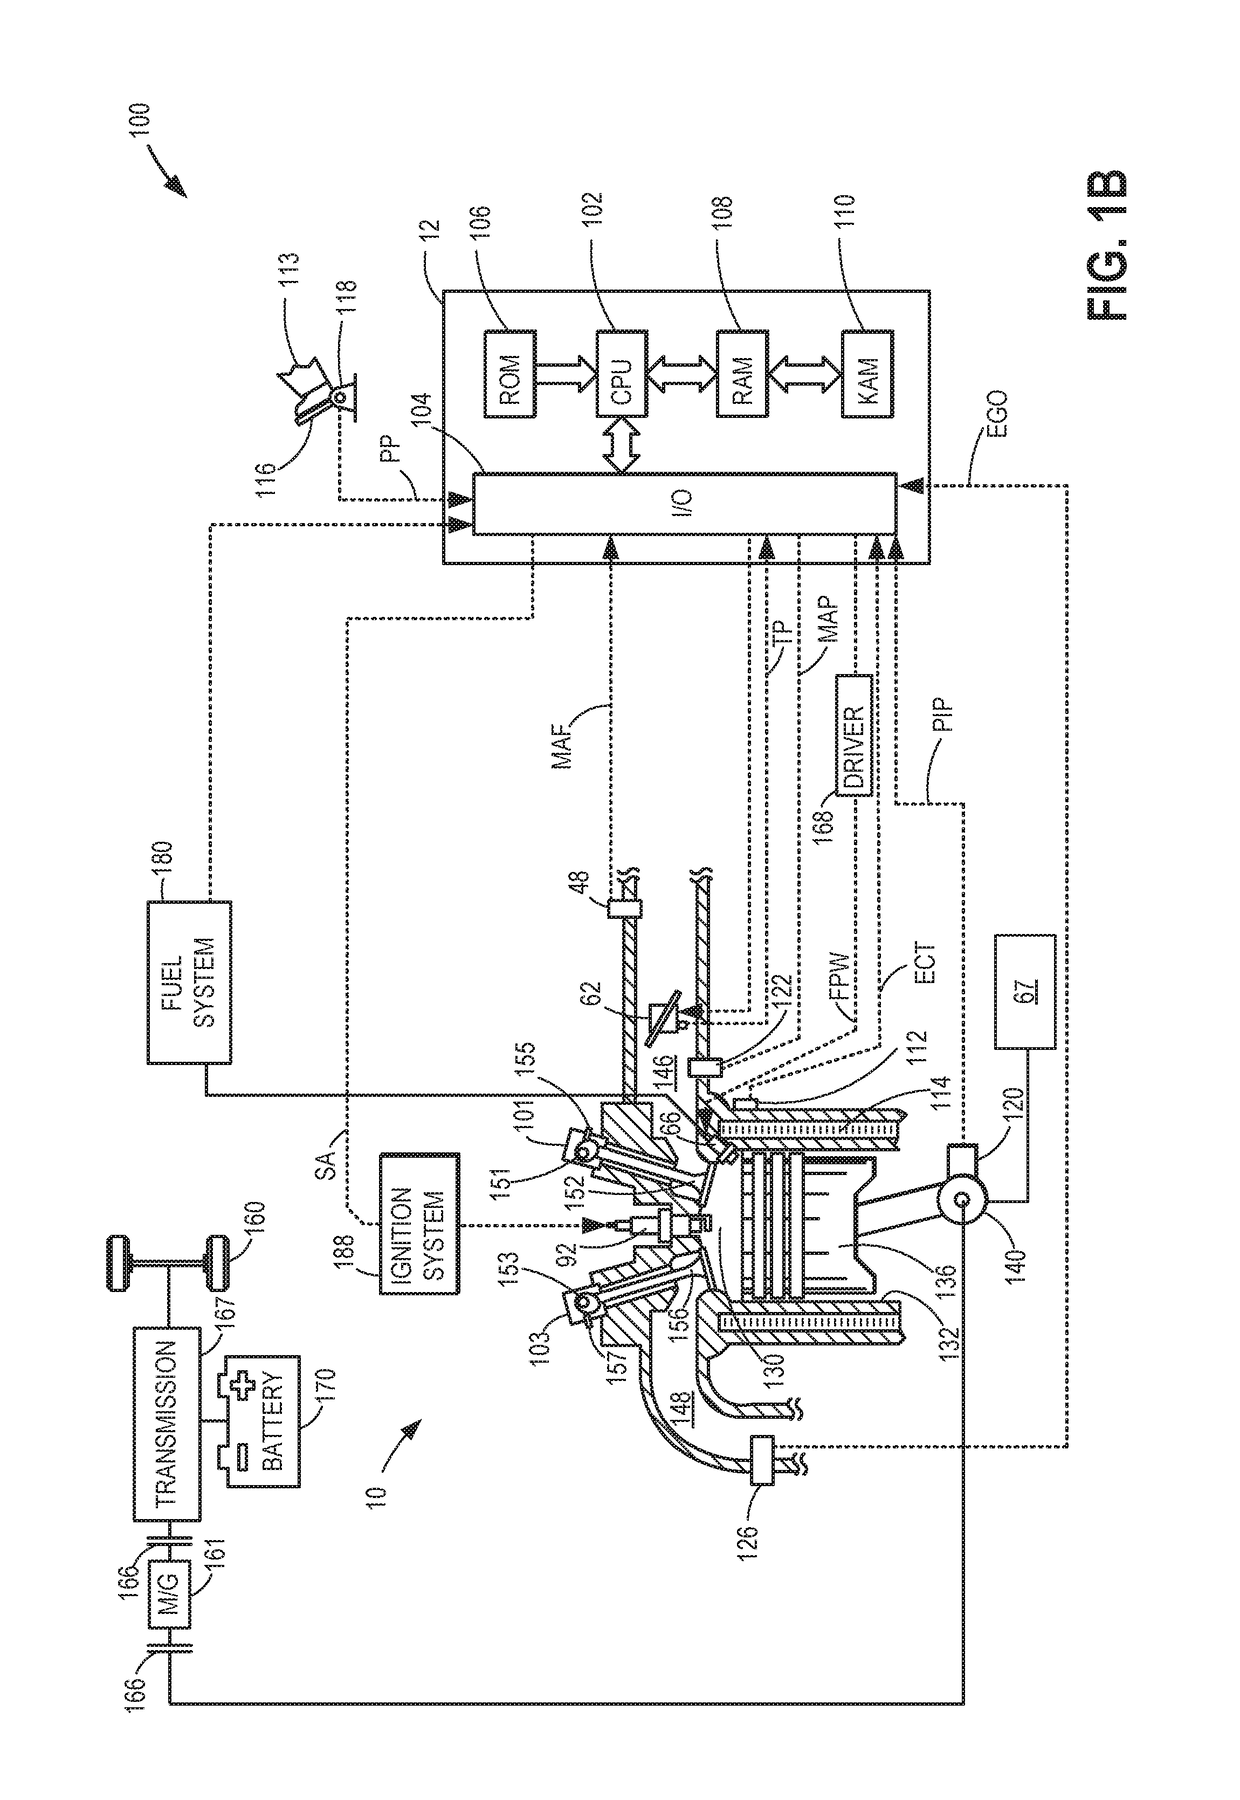 Systems and methods for a split exhaust engine system